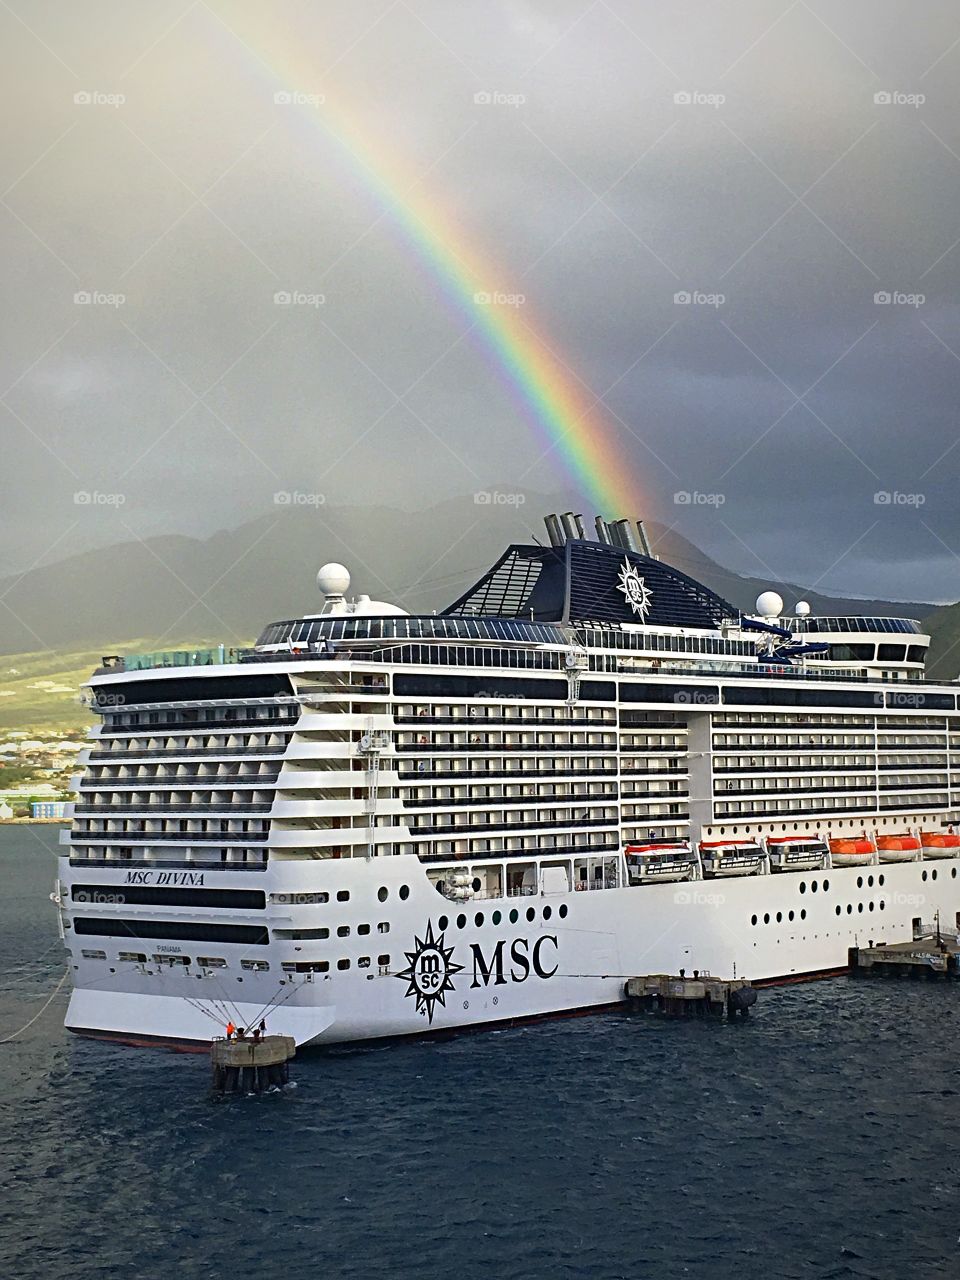 Beautiful double rainbow during a rainstorm.  It looks like it’s going right into the cruise ship in port at St. Kitts.